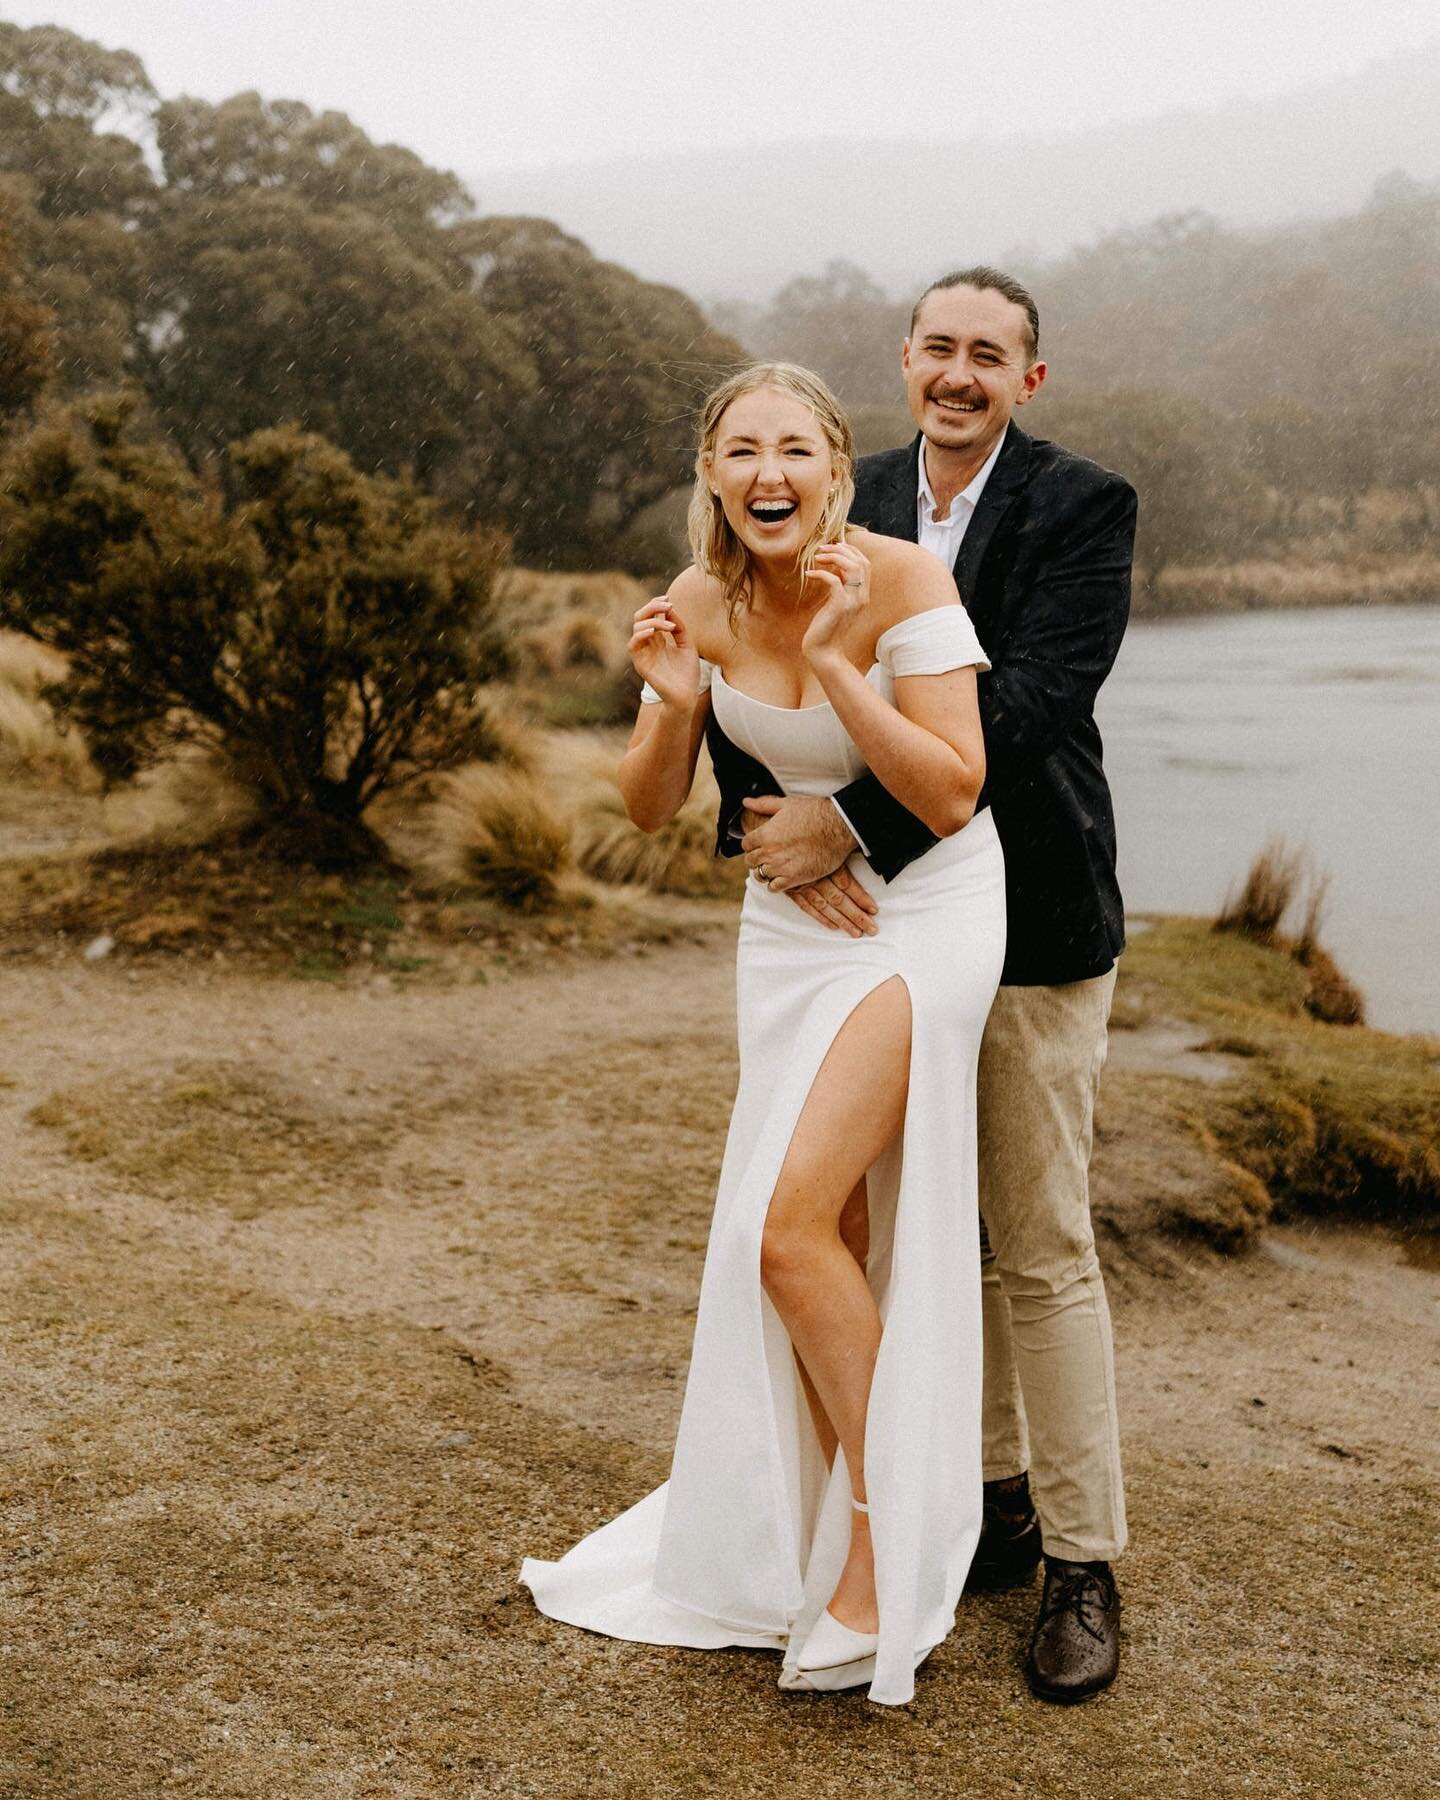 Tori and Ryan decided to elope in the magical Snowy Mountains, and they got to experience just about every type of weather that it has to offer. Sometimes you just need to embrace what comes your way and enjoy the ride! 🤍